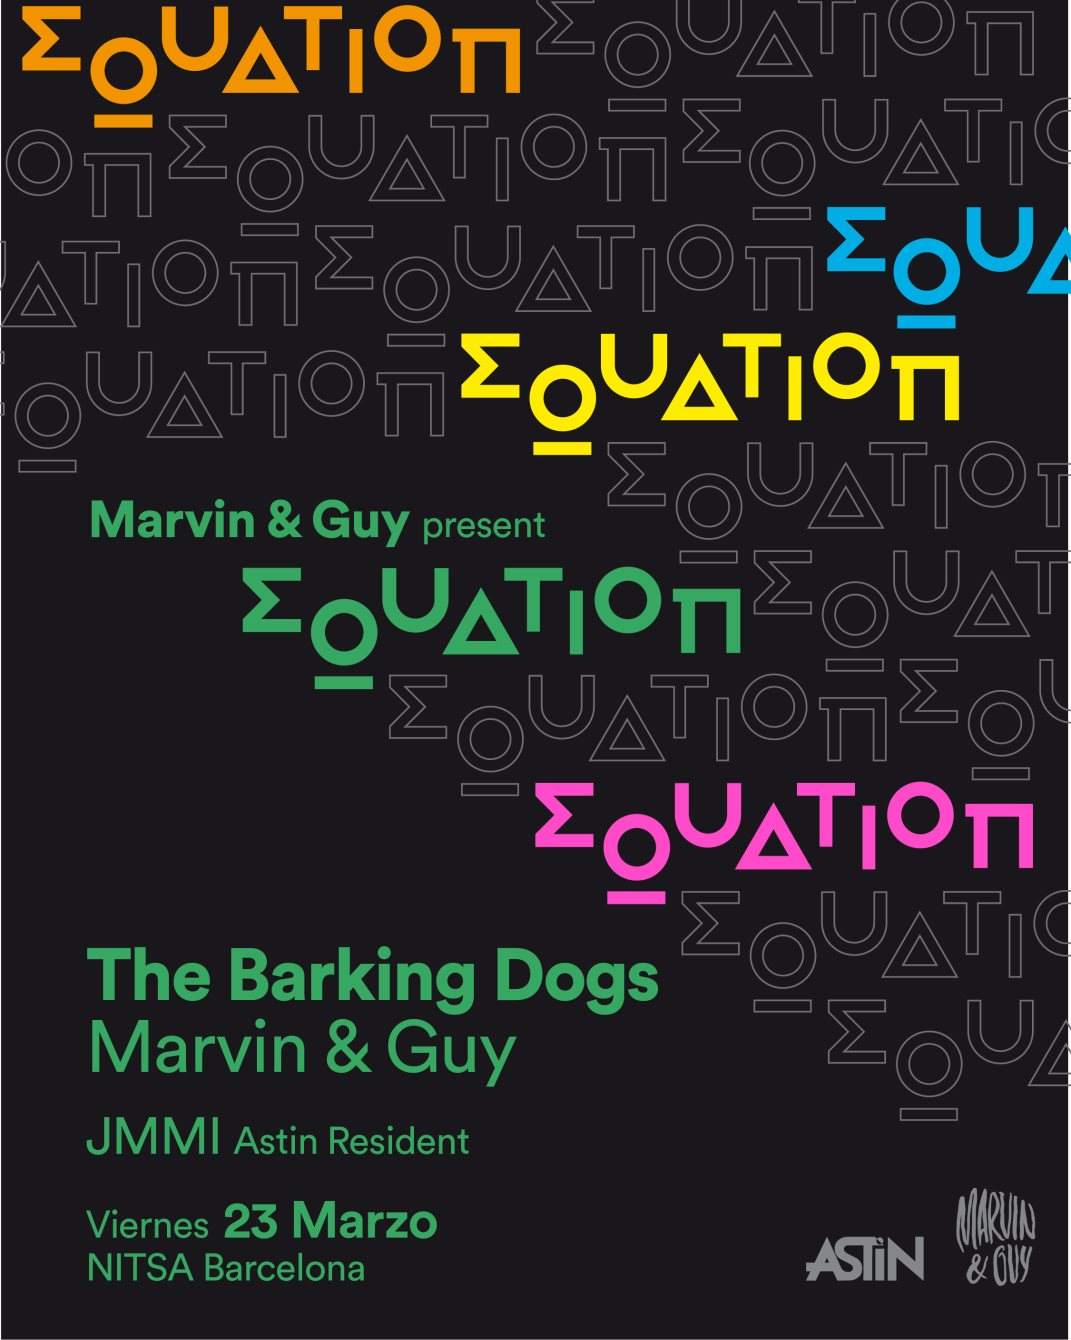 Equation 2 with The Barking Dogs - presented by Marvin & Guy - フライヤー裏